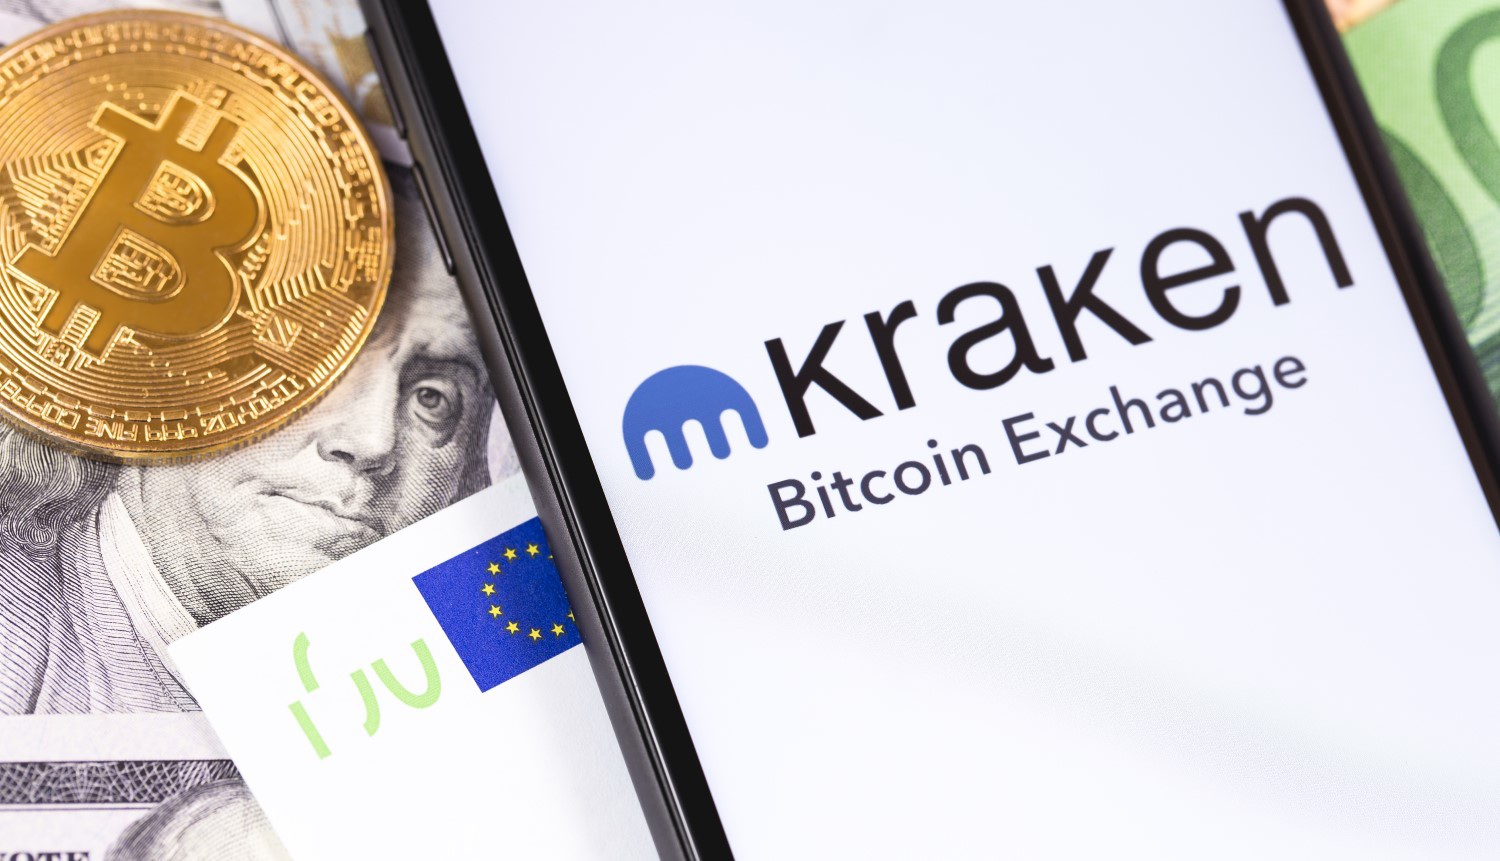 Exchange gives 1,000 USD in Bitcoin to Ukrainian users - 1